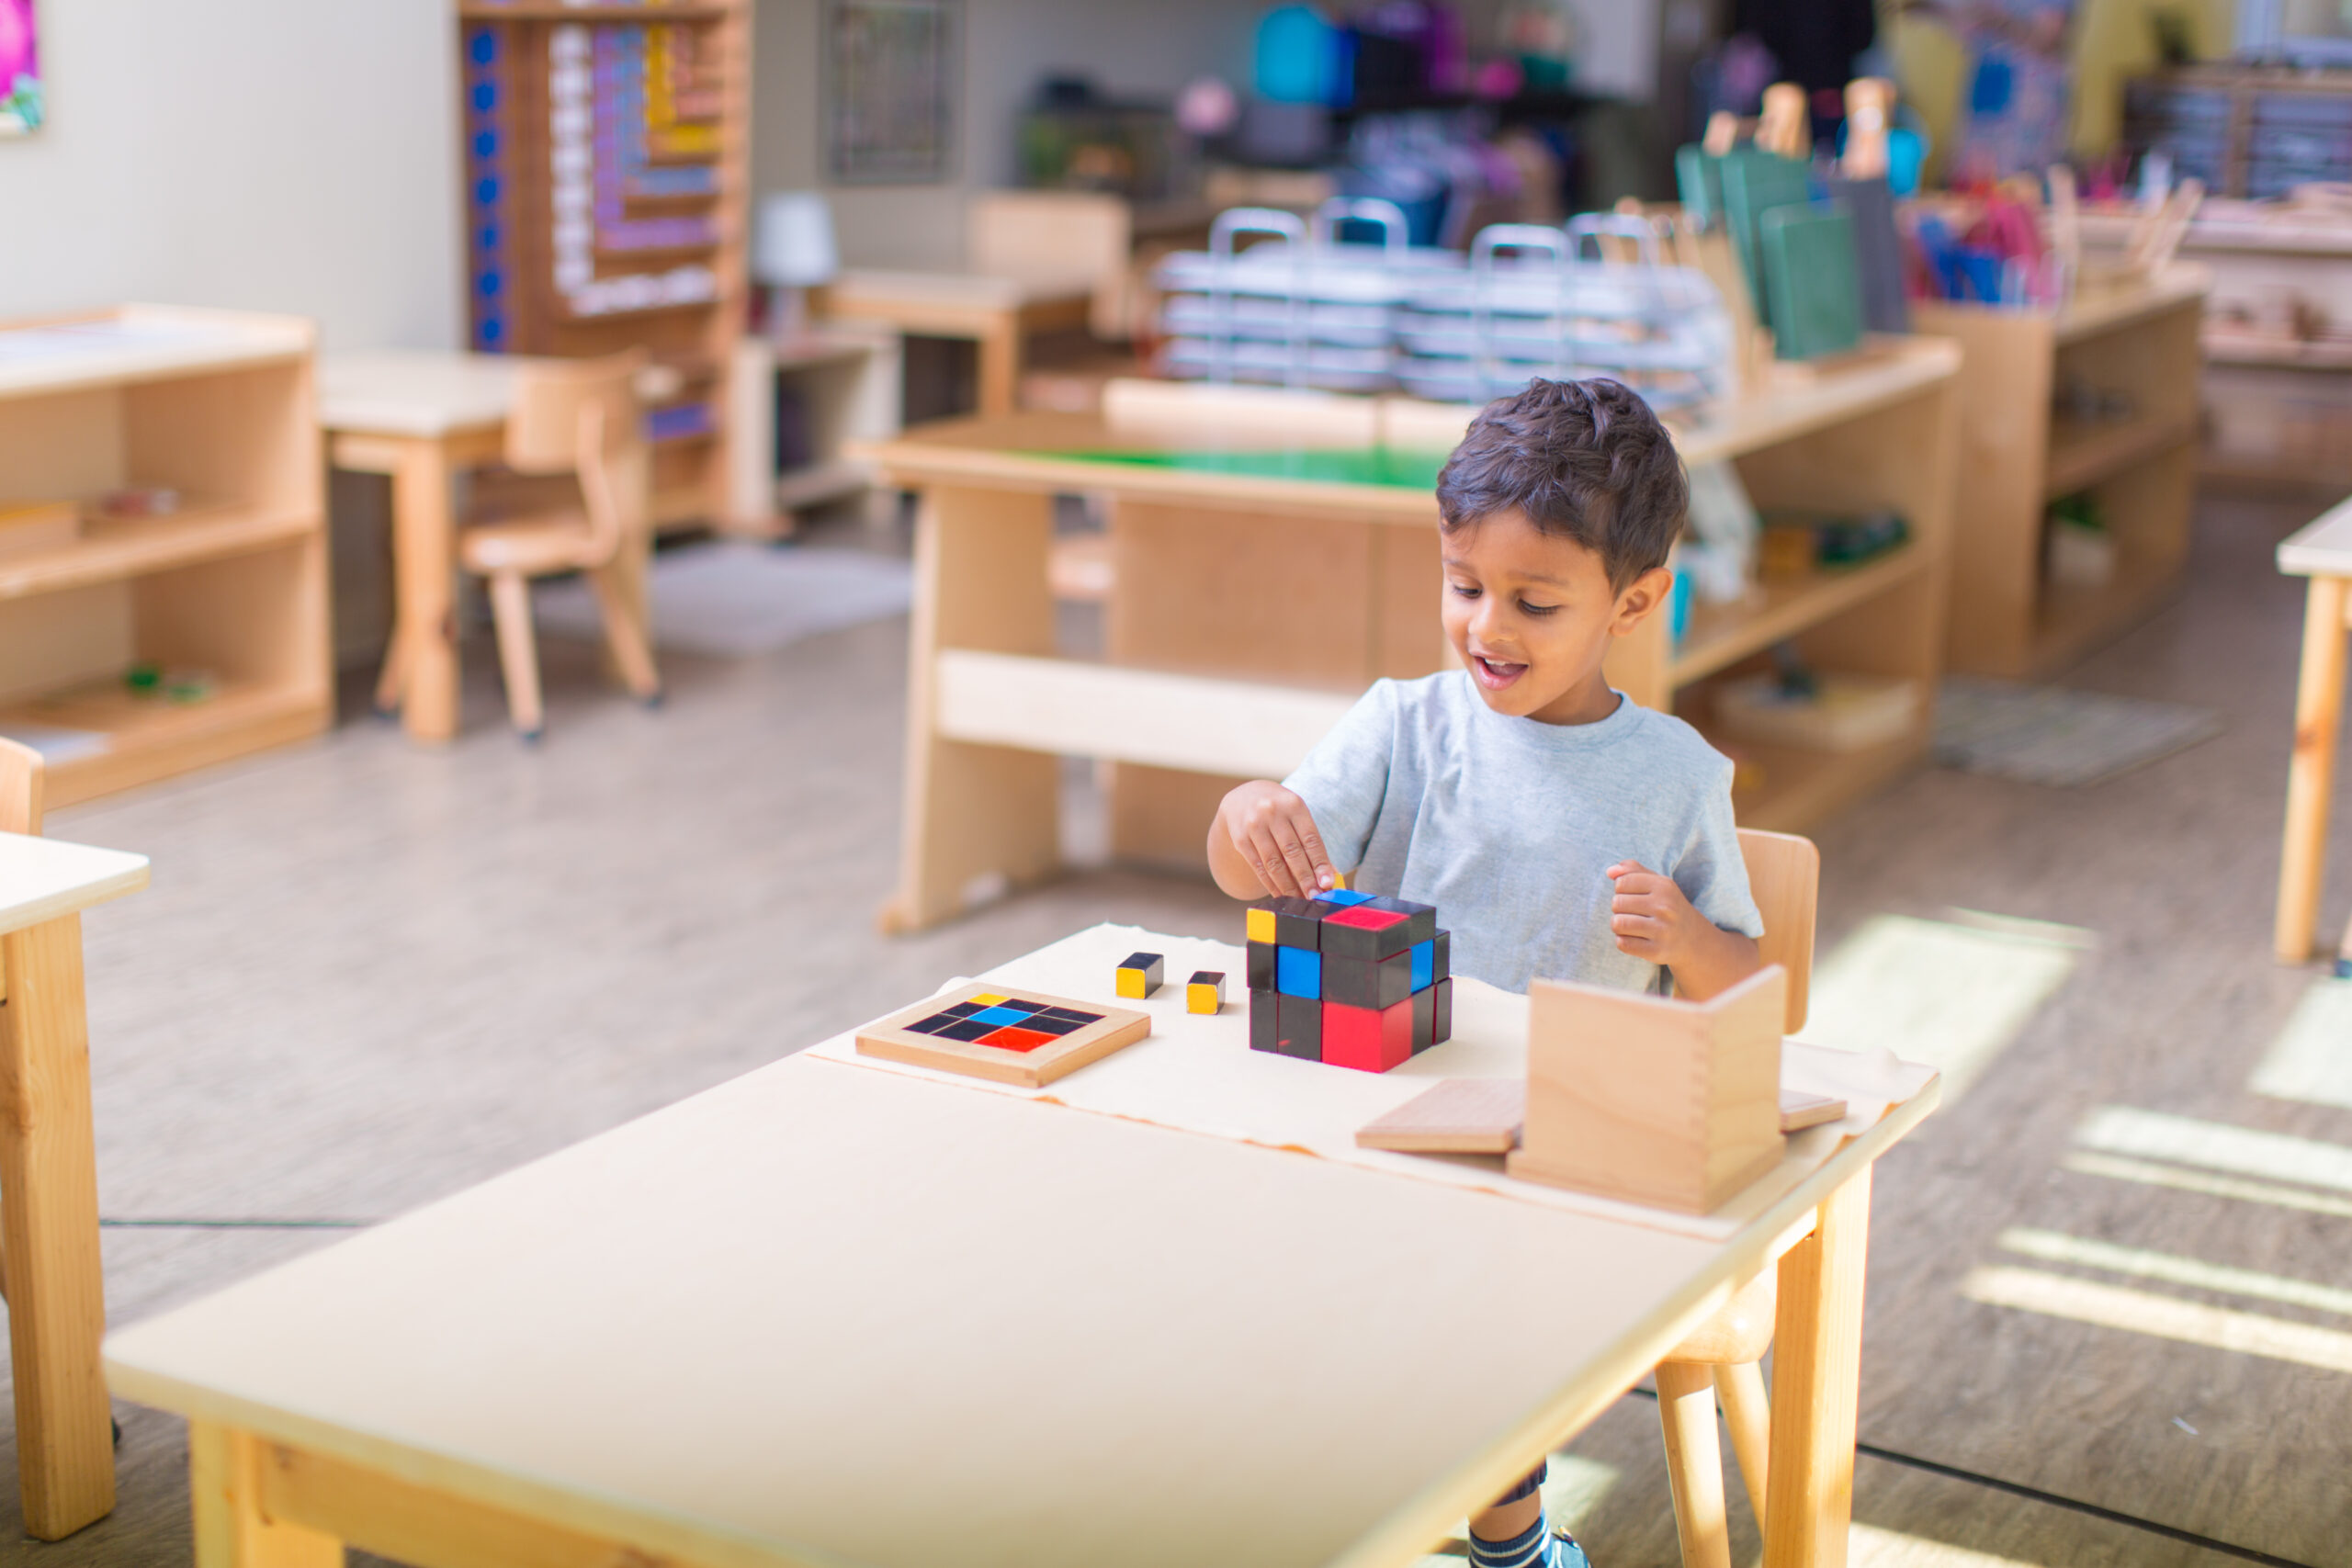 Young boy with grey t-shirt sits at wooden desk and works with a trinomial cube that is colored blue, black, and red